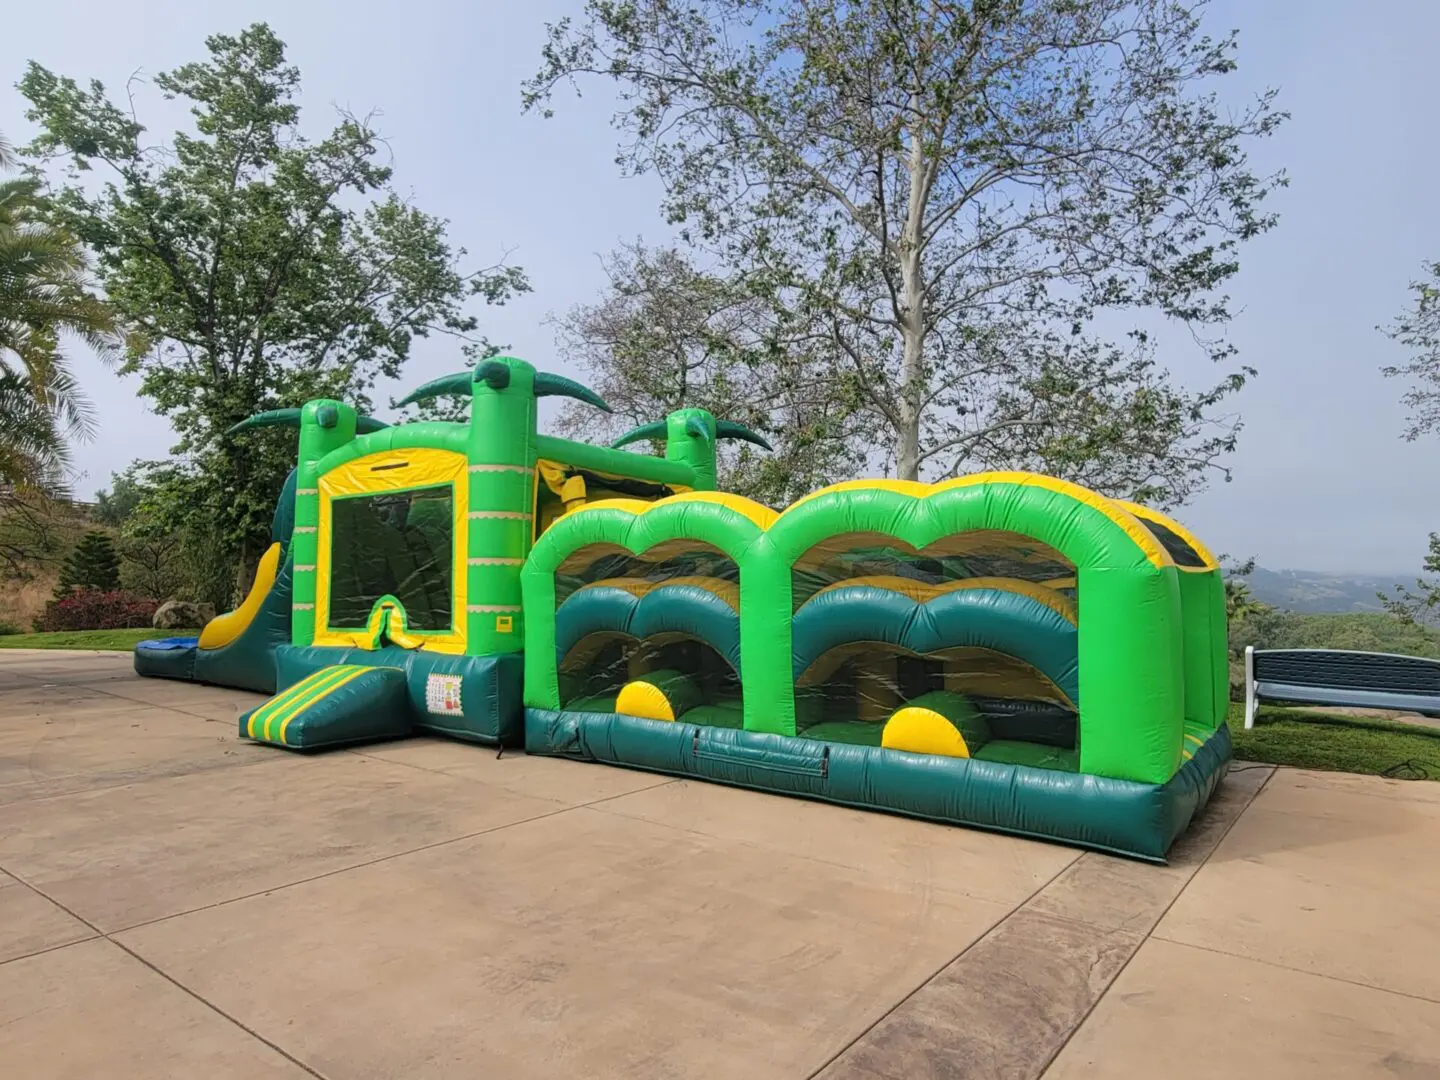 A green and yellow inflatable obstacle course set up in the yard.